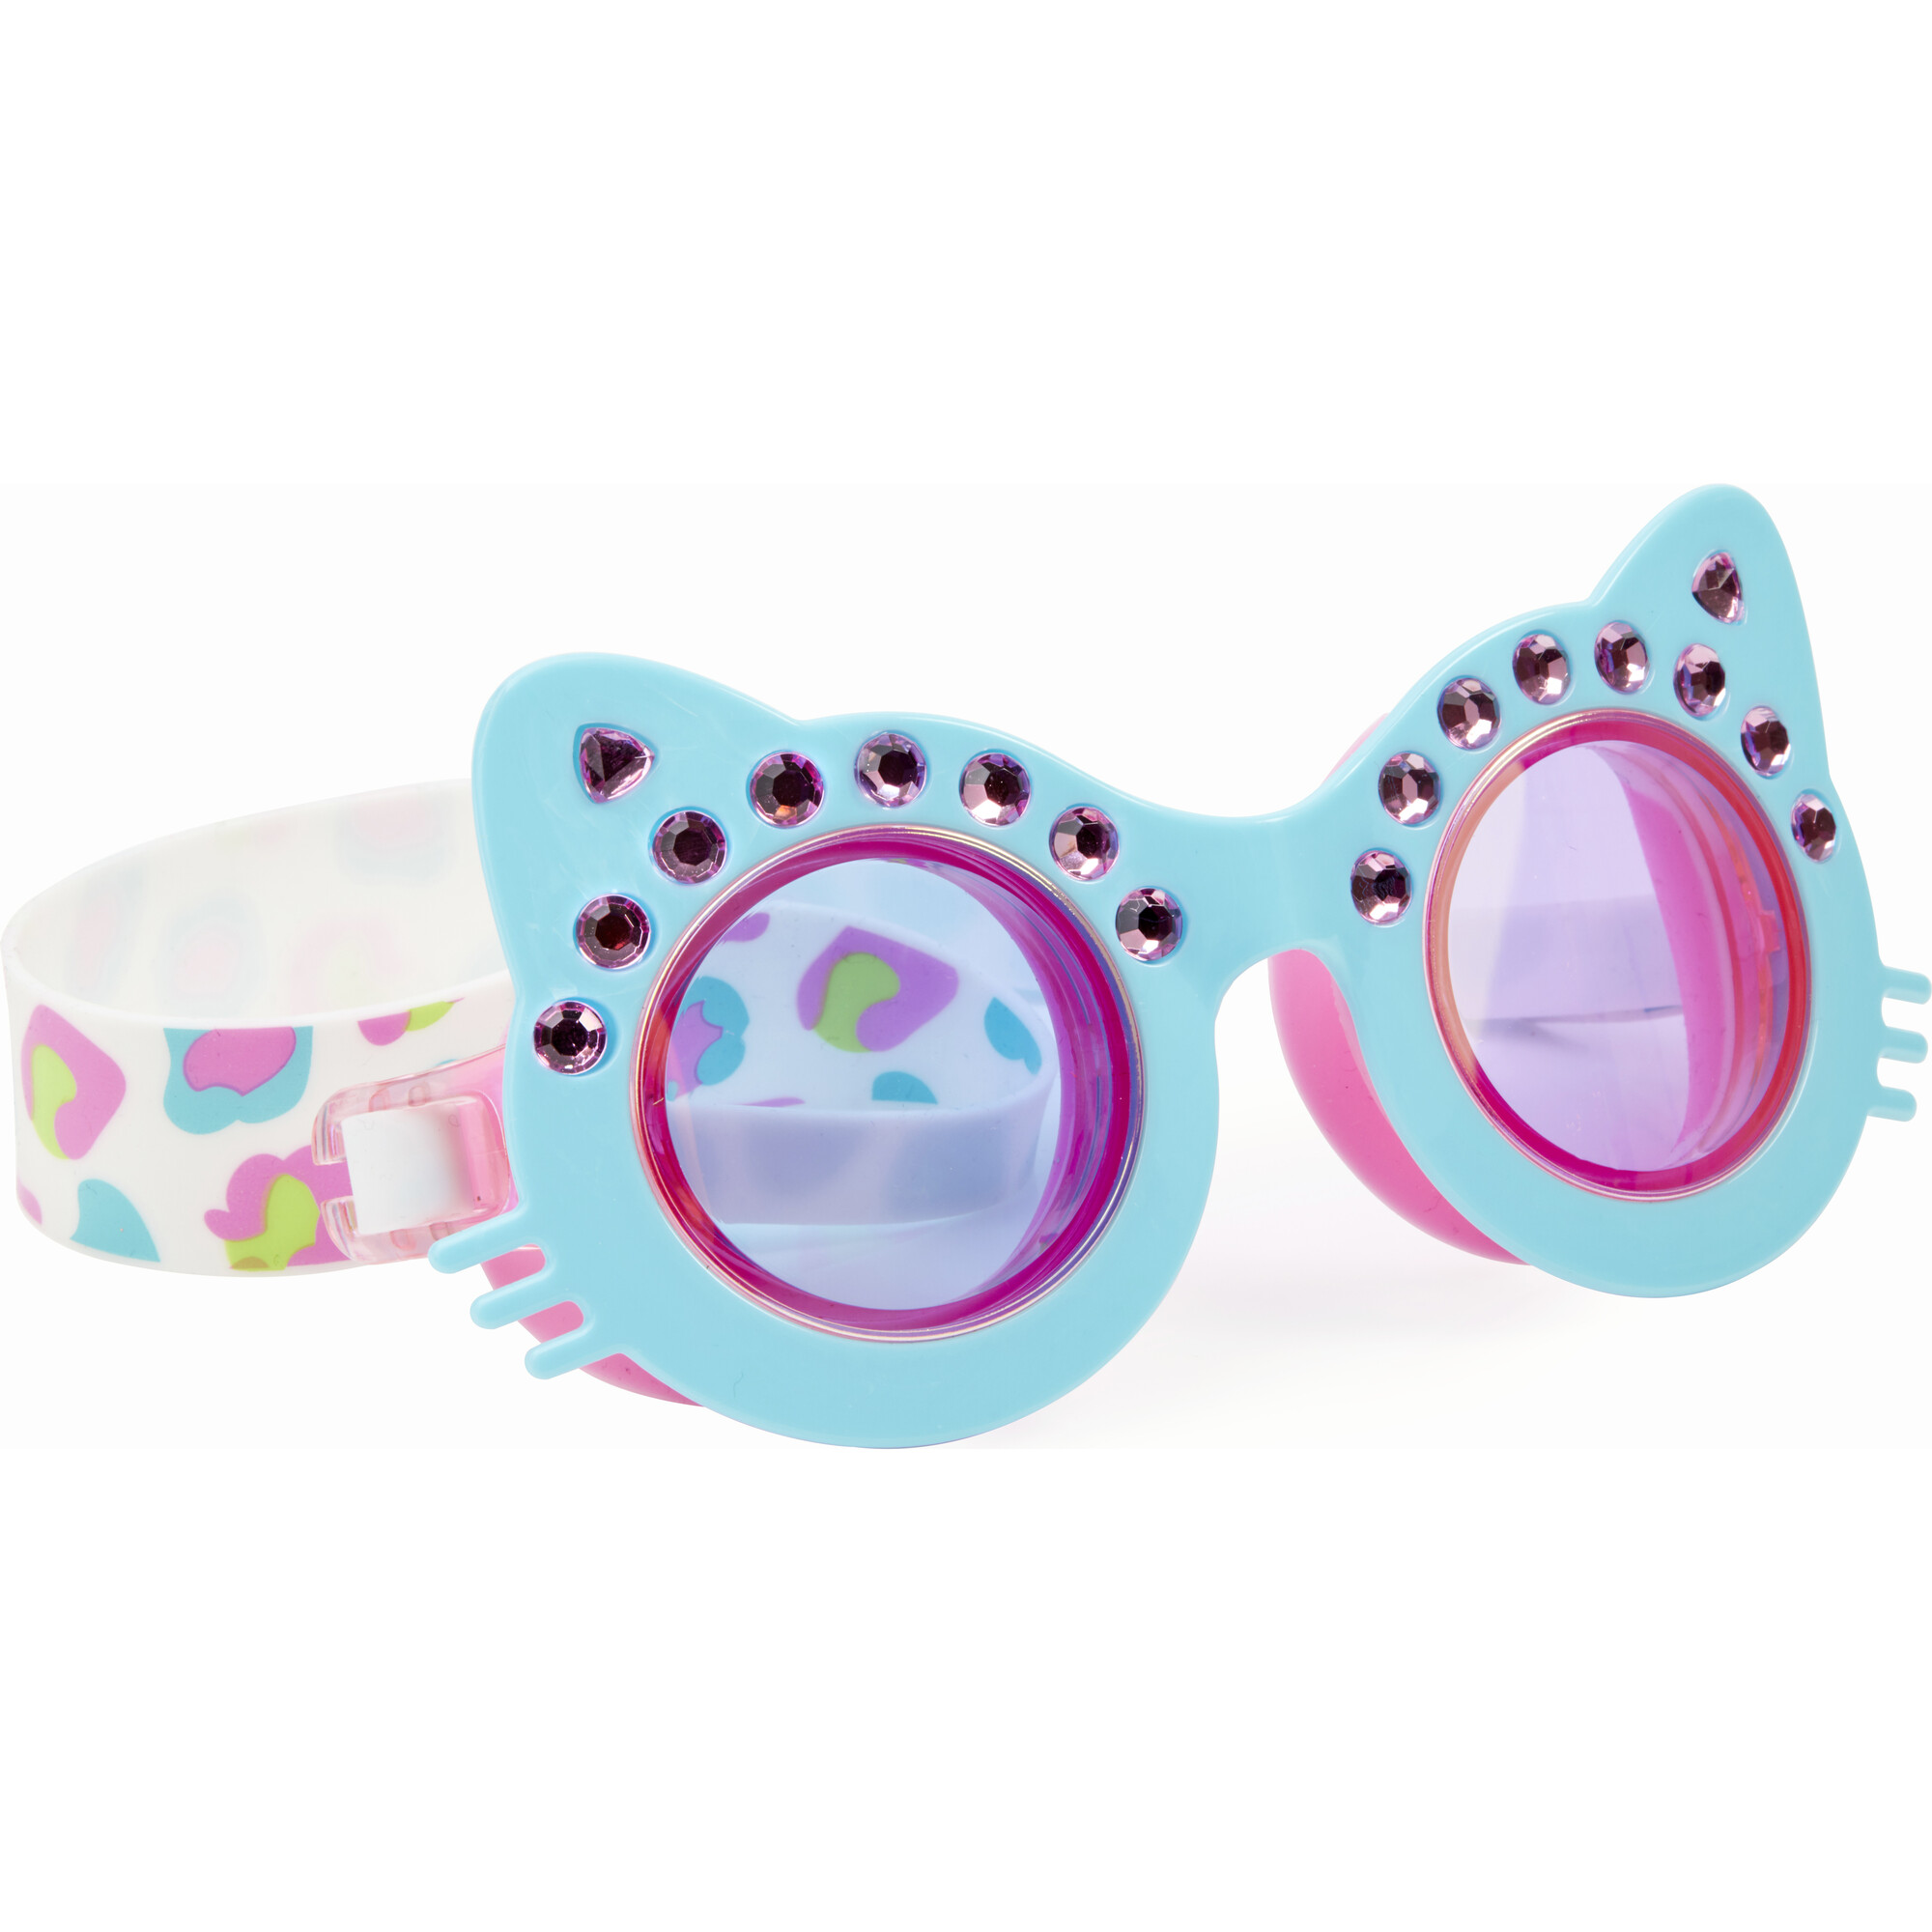 Anti Fog Non Slip and UV Protection Cat Shaped Swimming Goggles for Kids by Bling2O Purrfect Pink Colored Fun Water Accessory Includes Hard Case No Leak